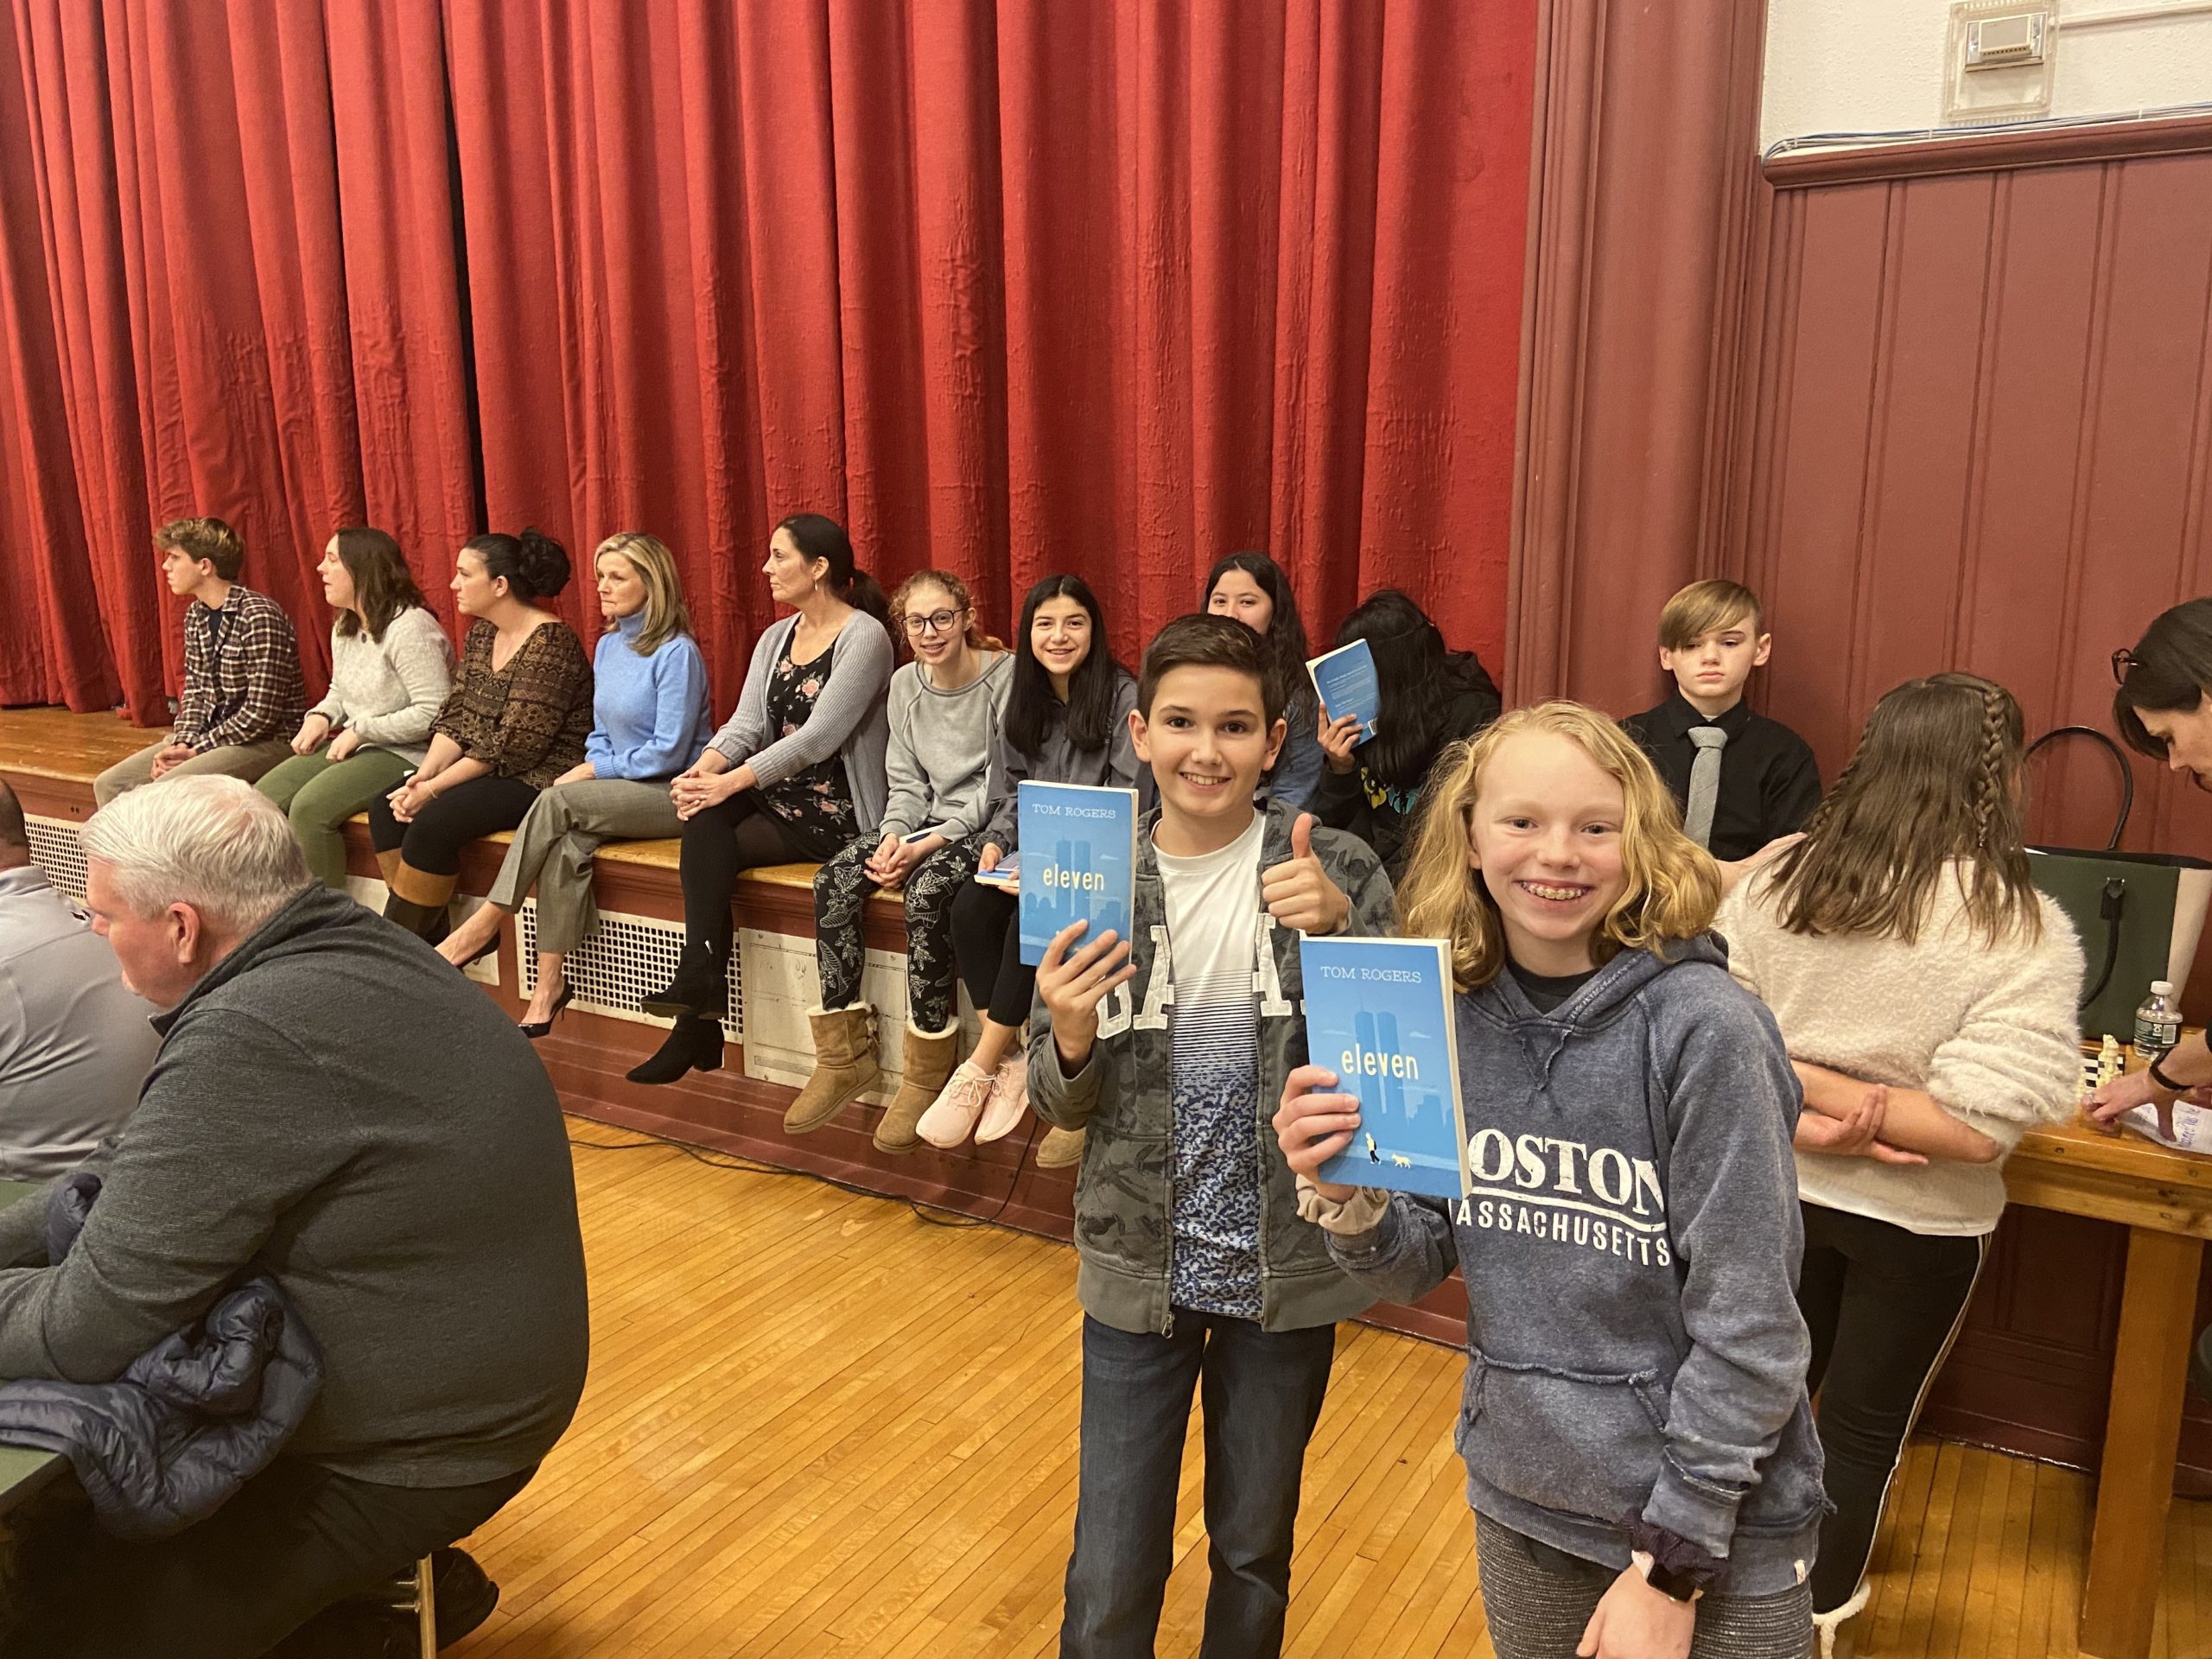 Westhampton Beach Middle School recently hosted a  community read event featuring the book “Eleven” by Tom Rogers, culminating a monthlong reading of the book and a Skype talk with the author during which students and community members asked Mr. Rogers about his writing and his life.